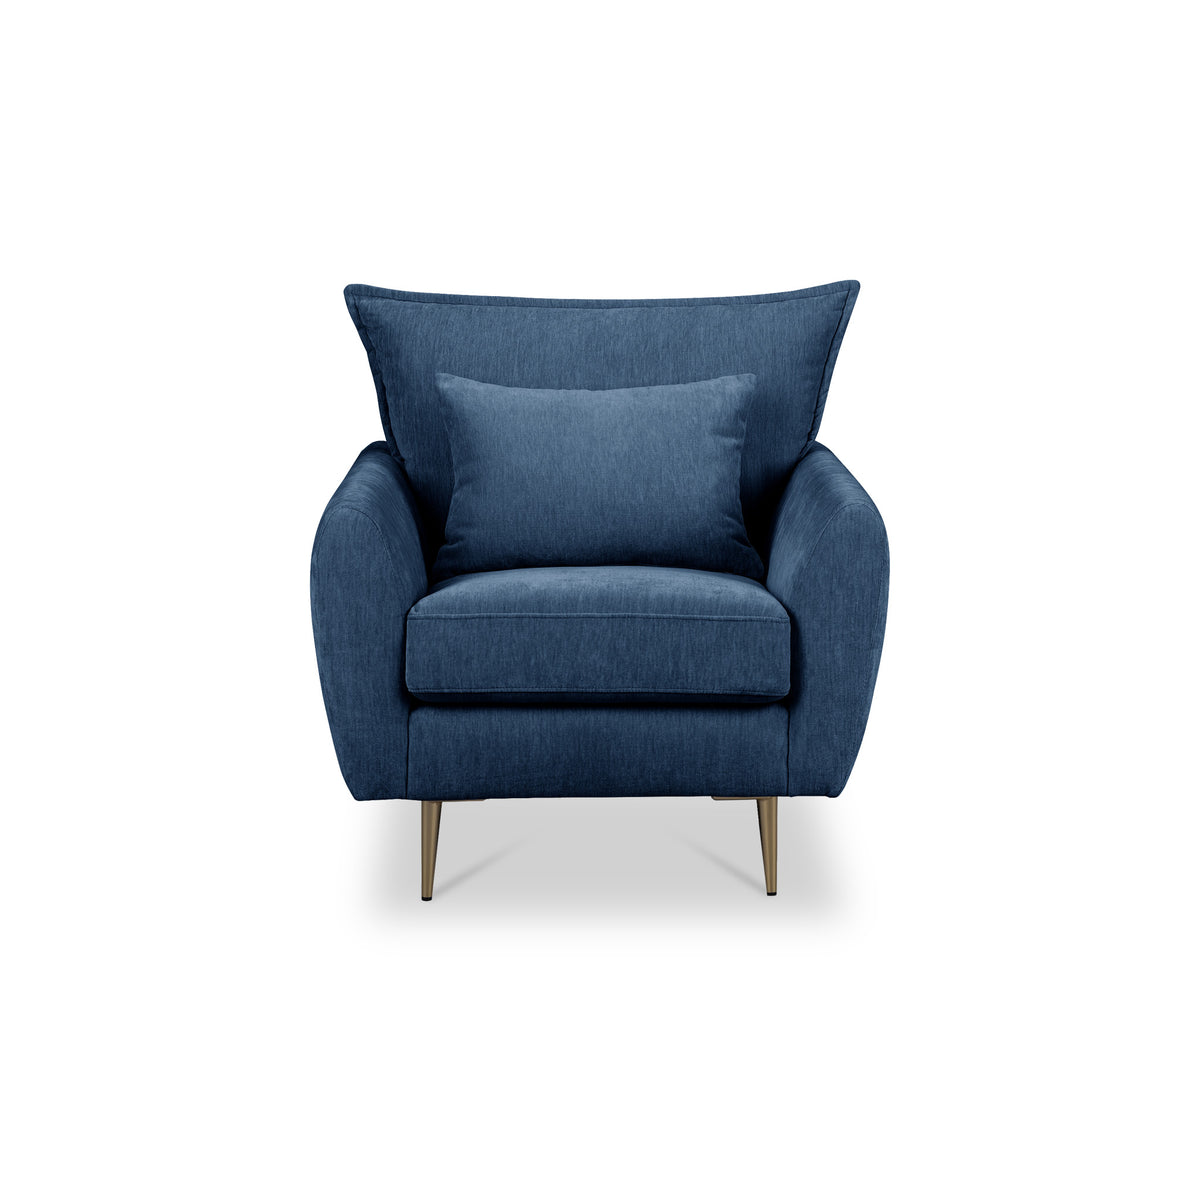 Evelyn Navy Blue Armchair from Roseland Furniture